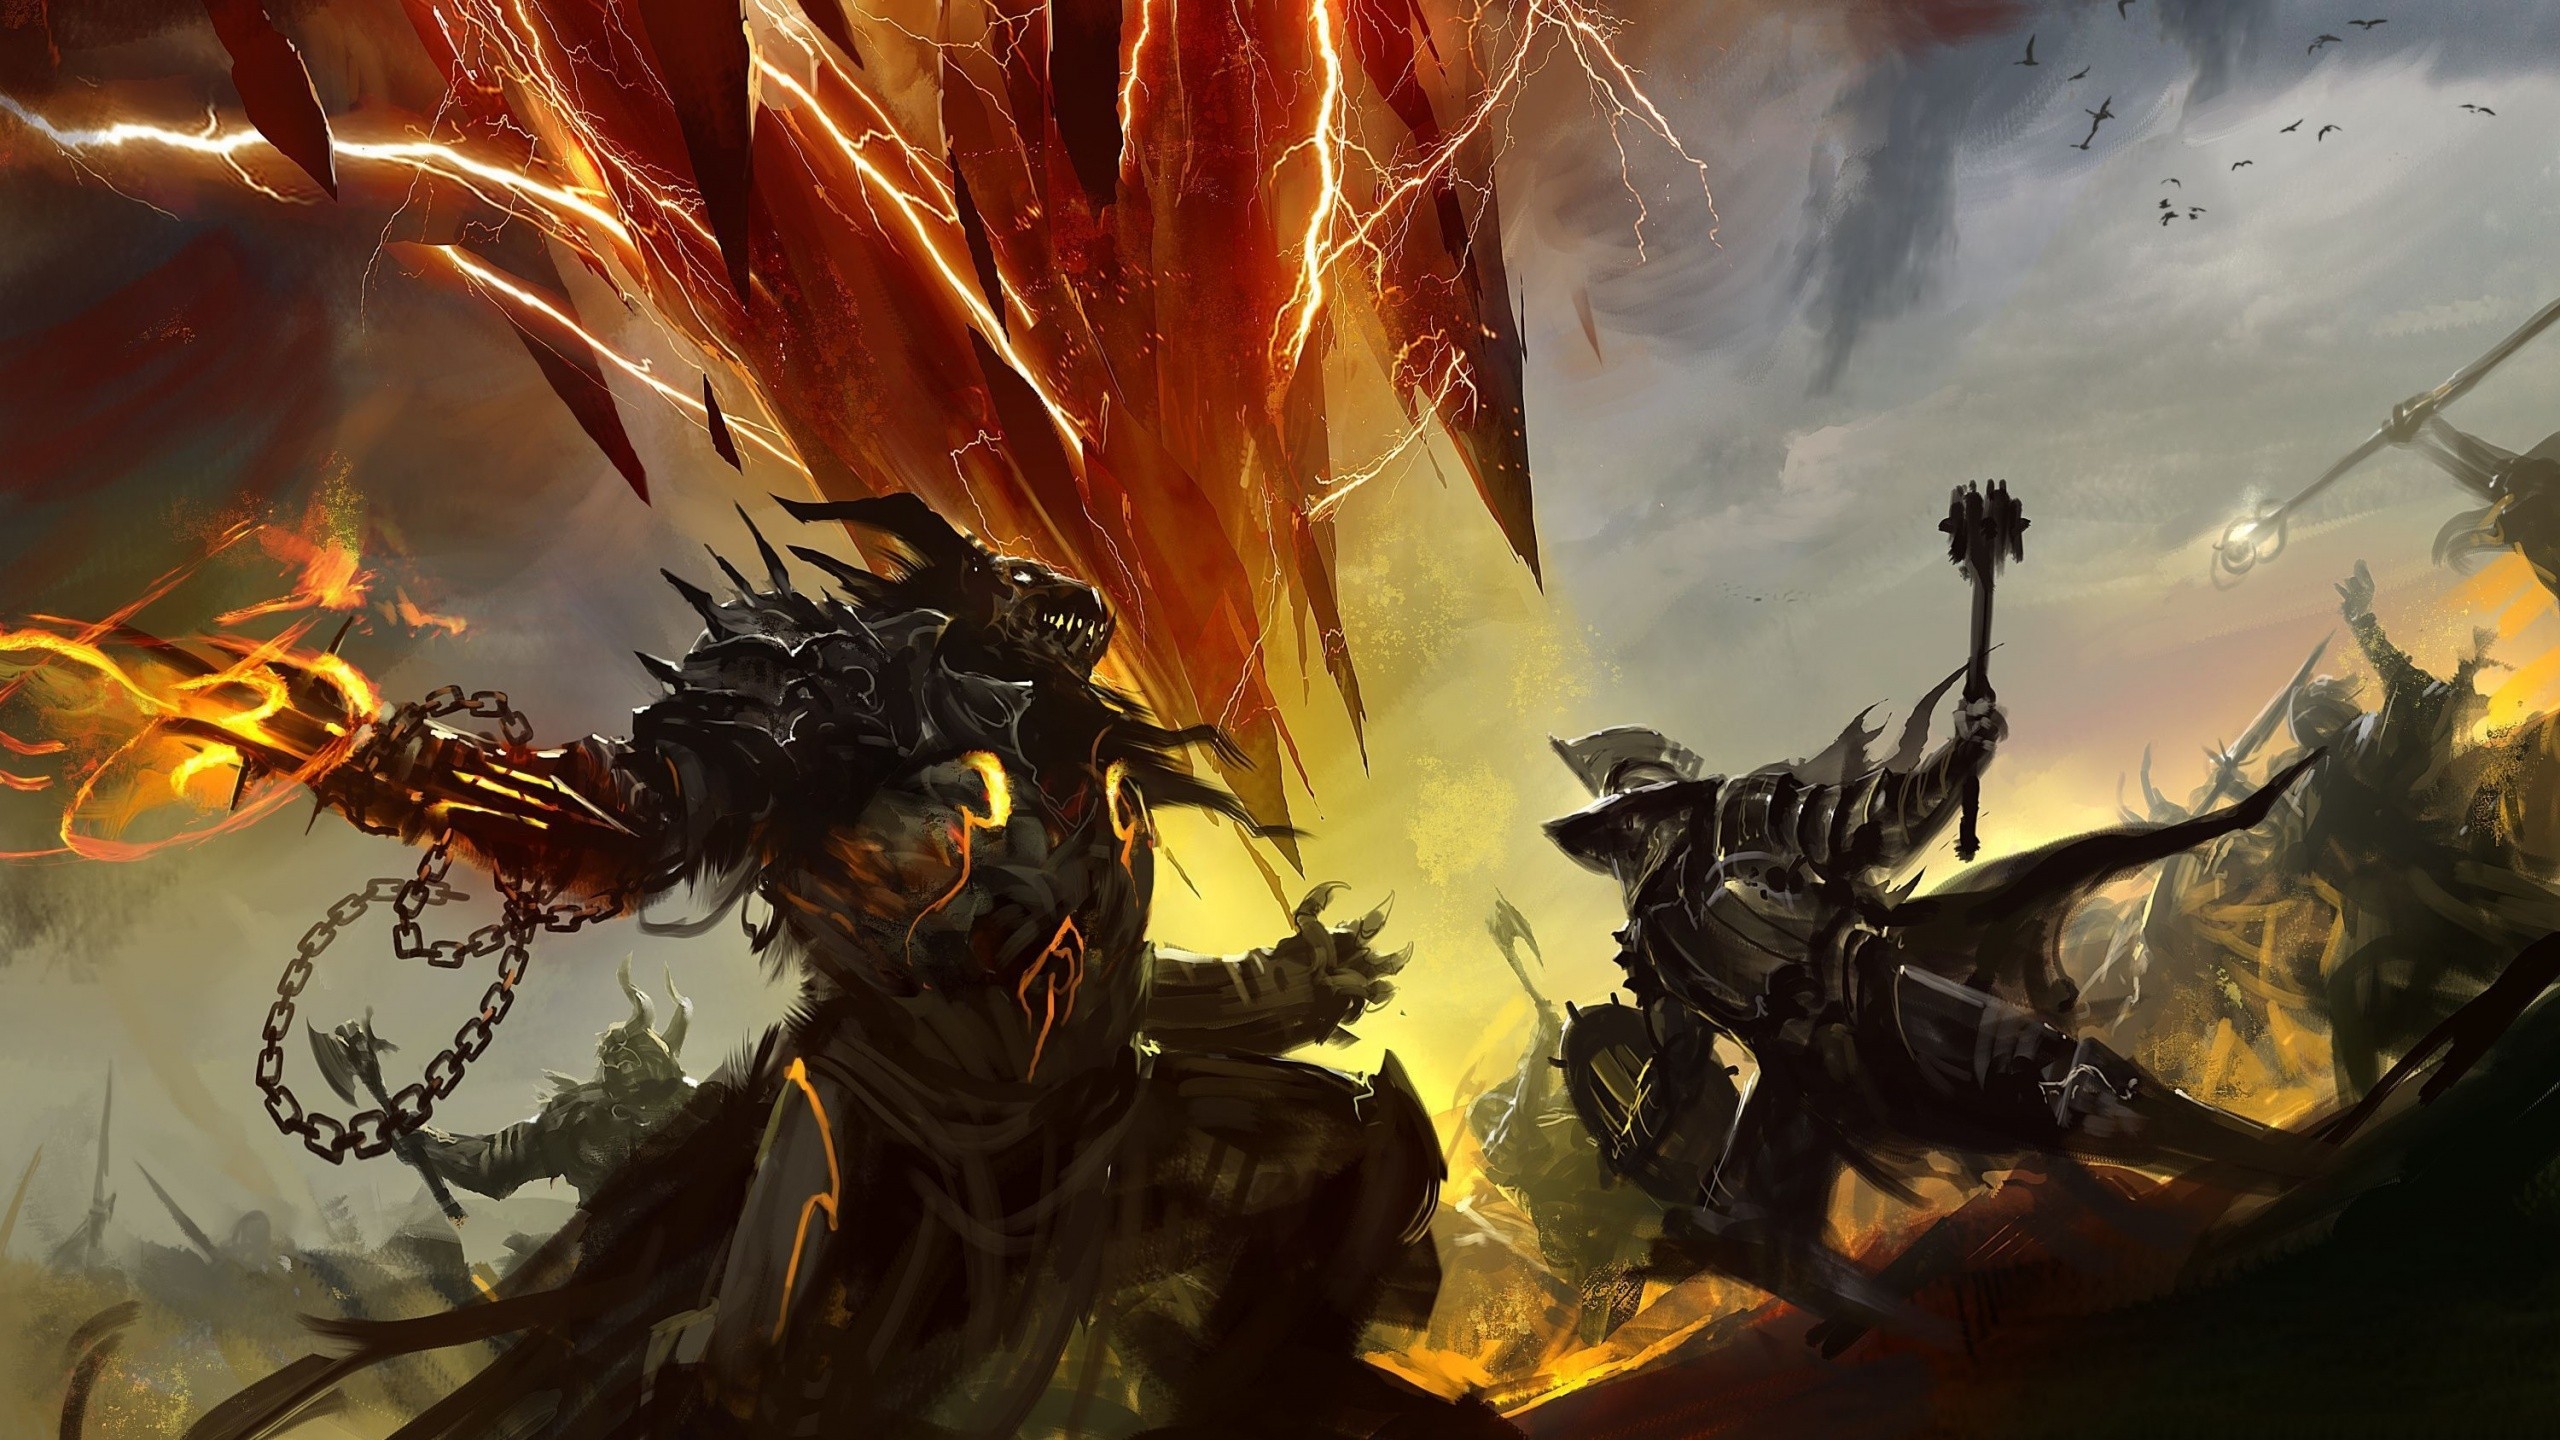 guild wars 2 wallpaper,action adventure game,strategy video game,cg artwork,demon,pc game